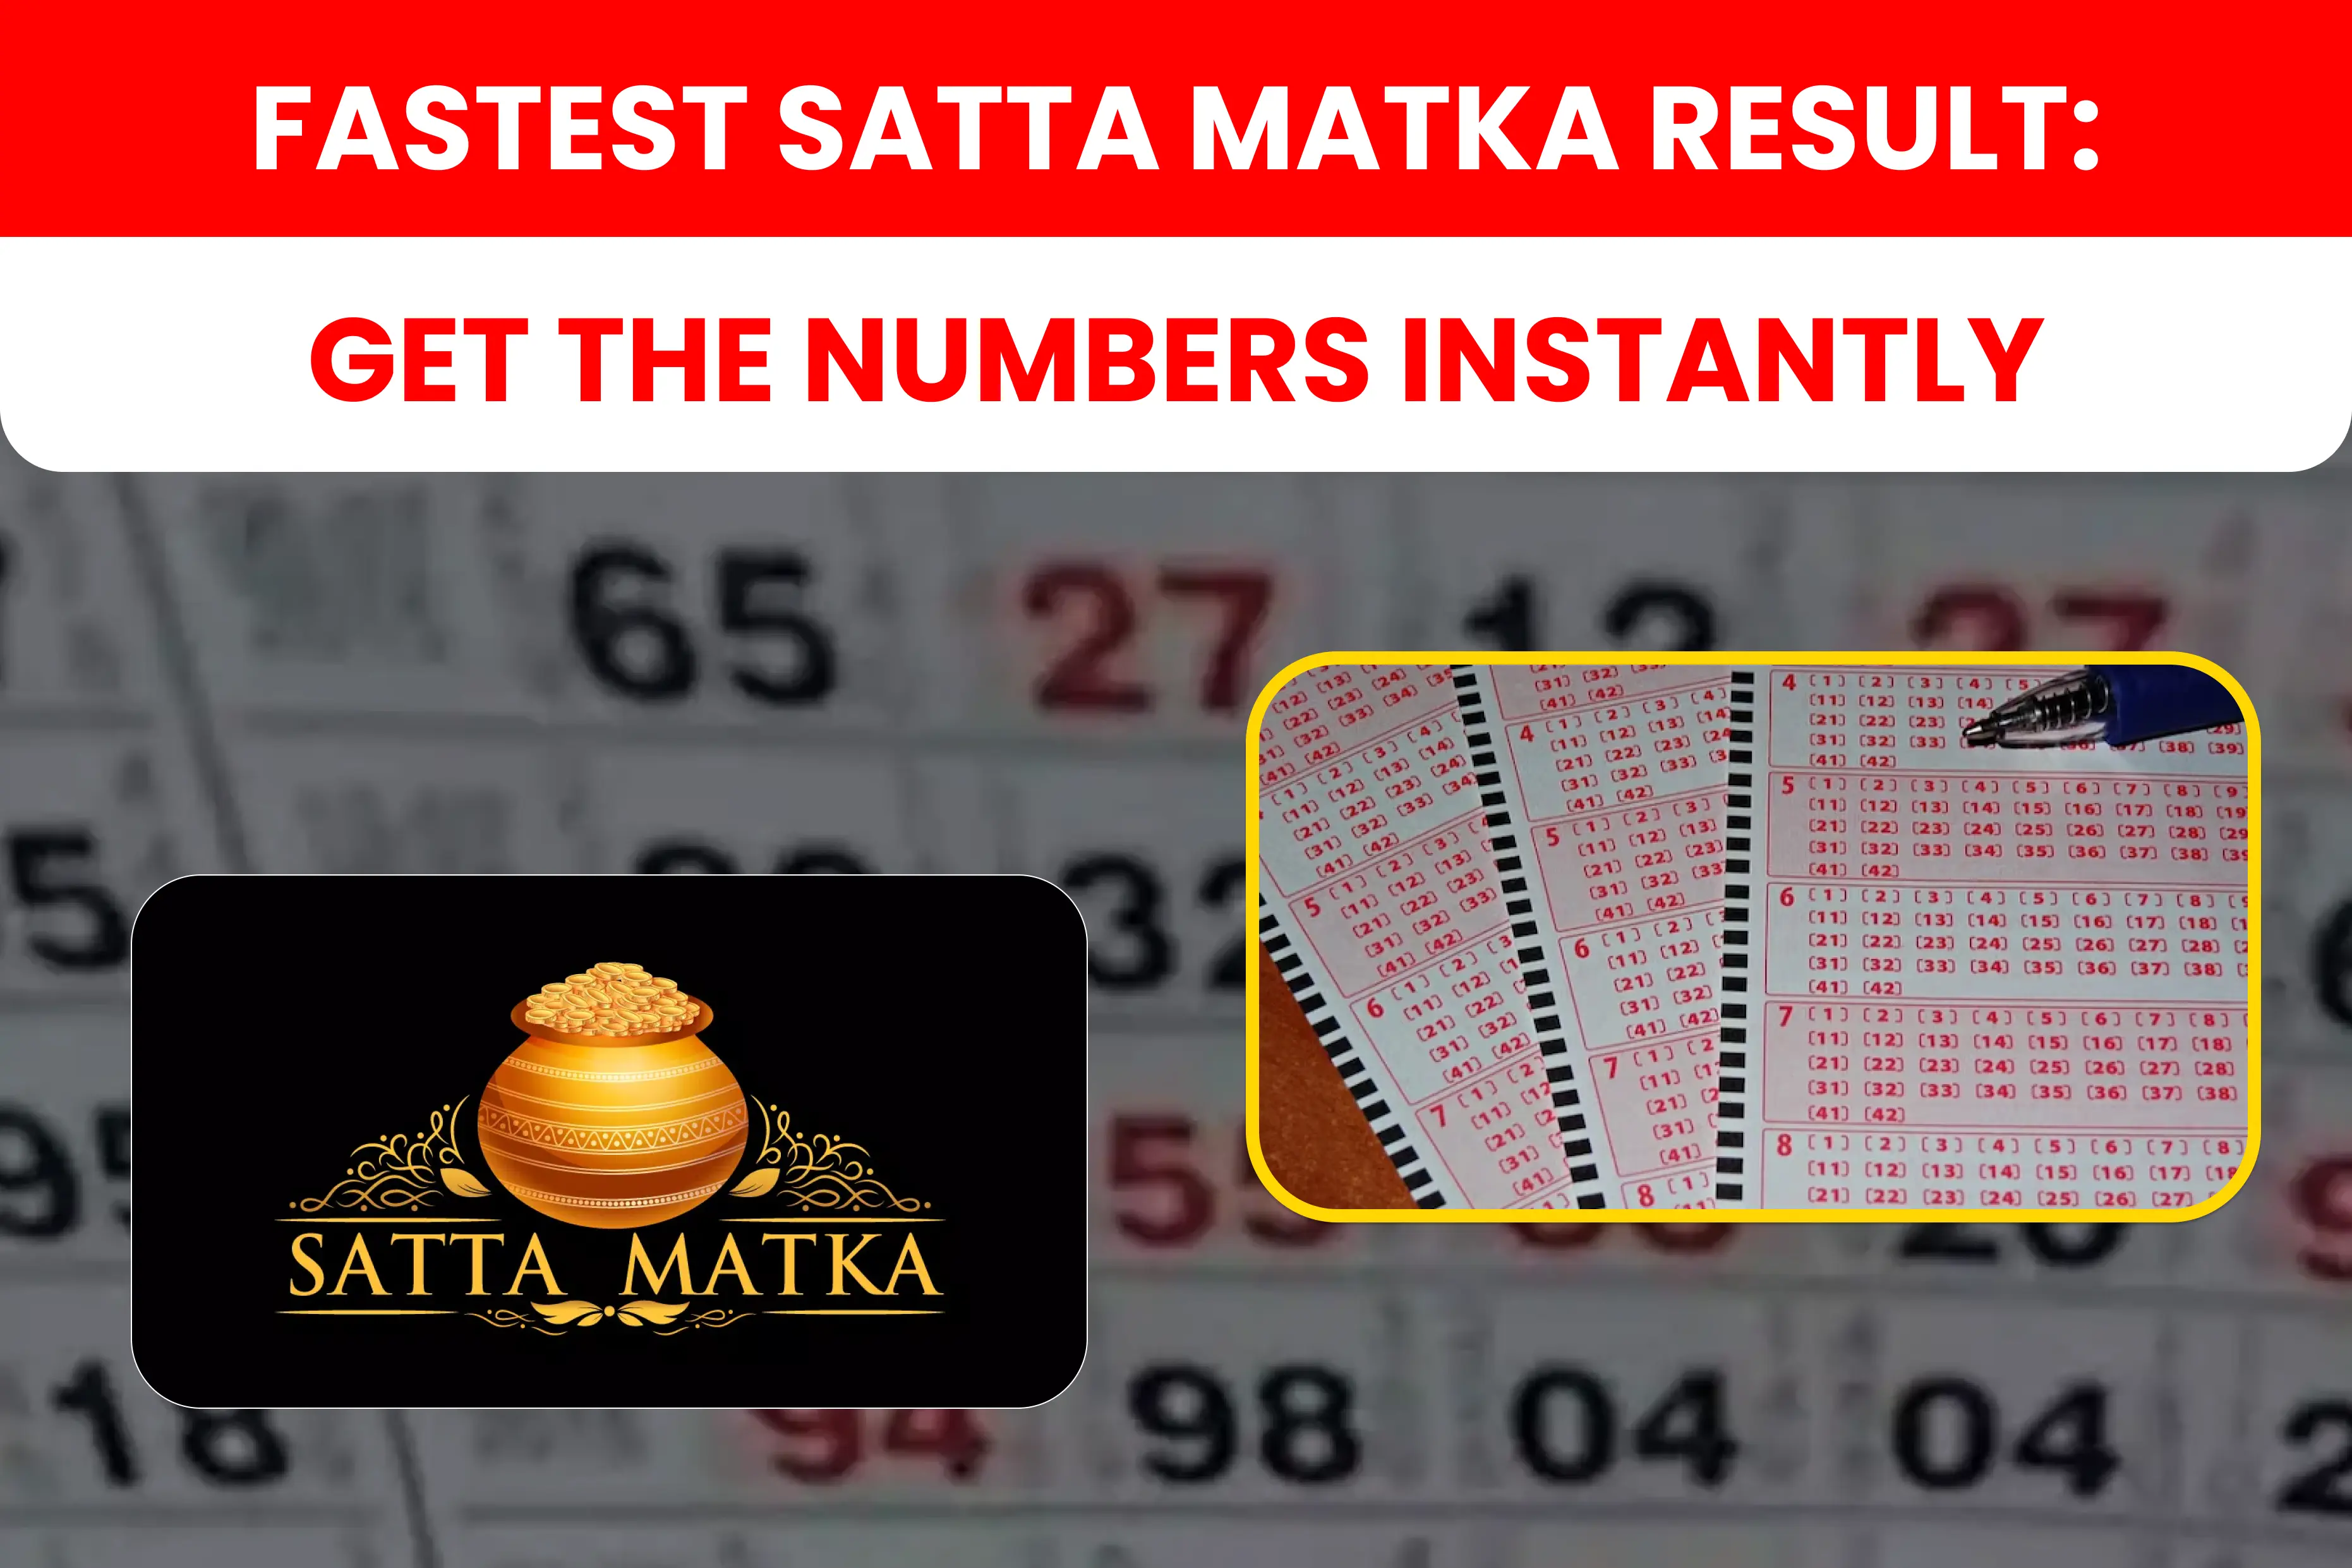 Fastest Satta Matka Result: Get the Numbers Instantly